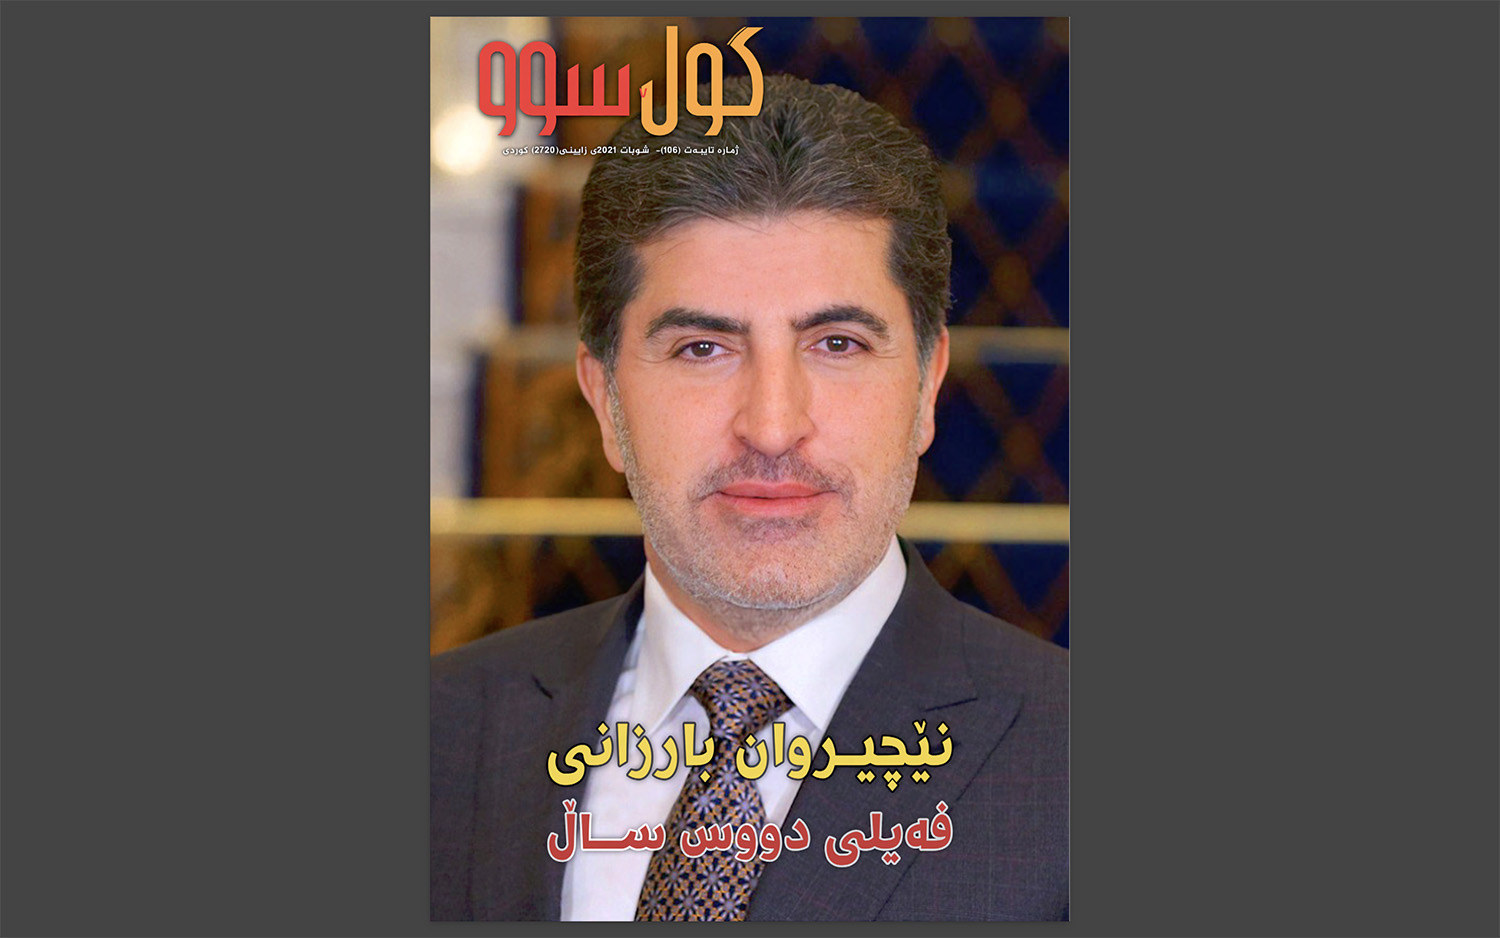 "Gull Soo" releases "Feyli Doos".. Names "Nechirvan Barzani" as "The Person of the Year"